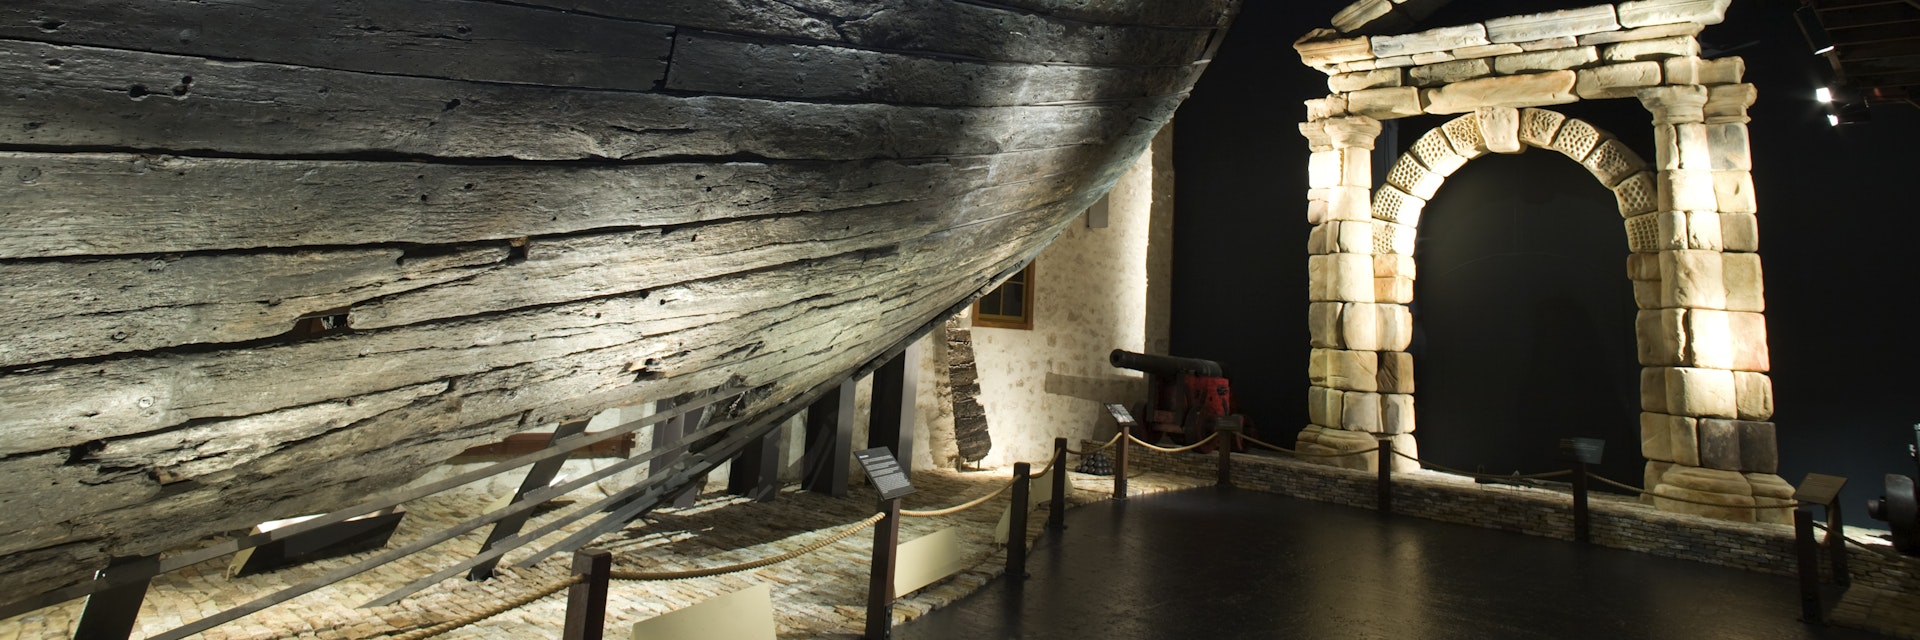 Part of the wreck of the Batavia at the Shipwreck Galleries.